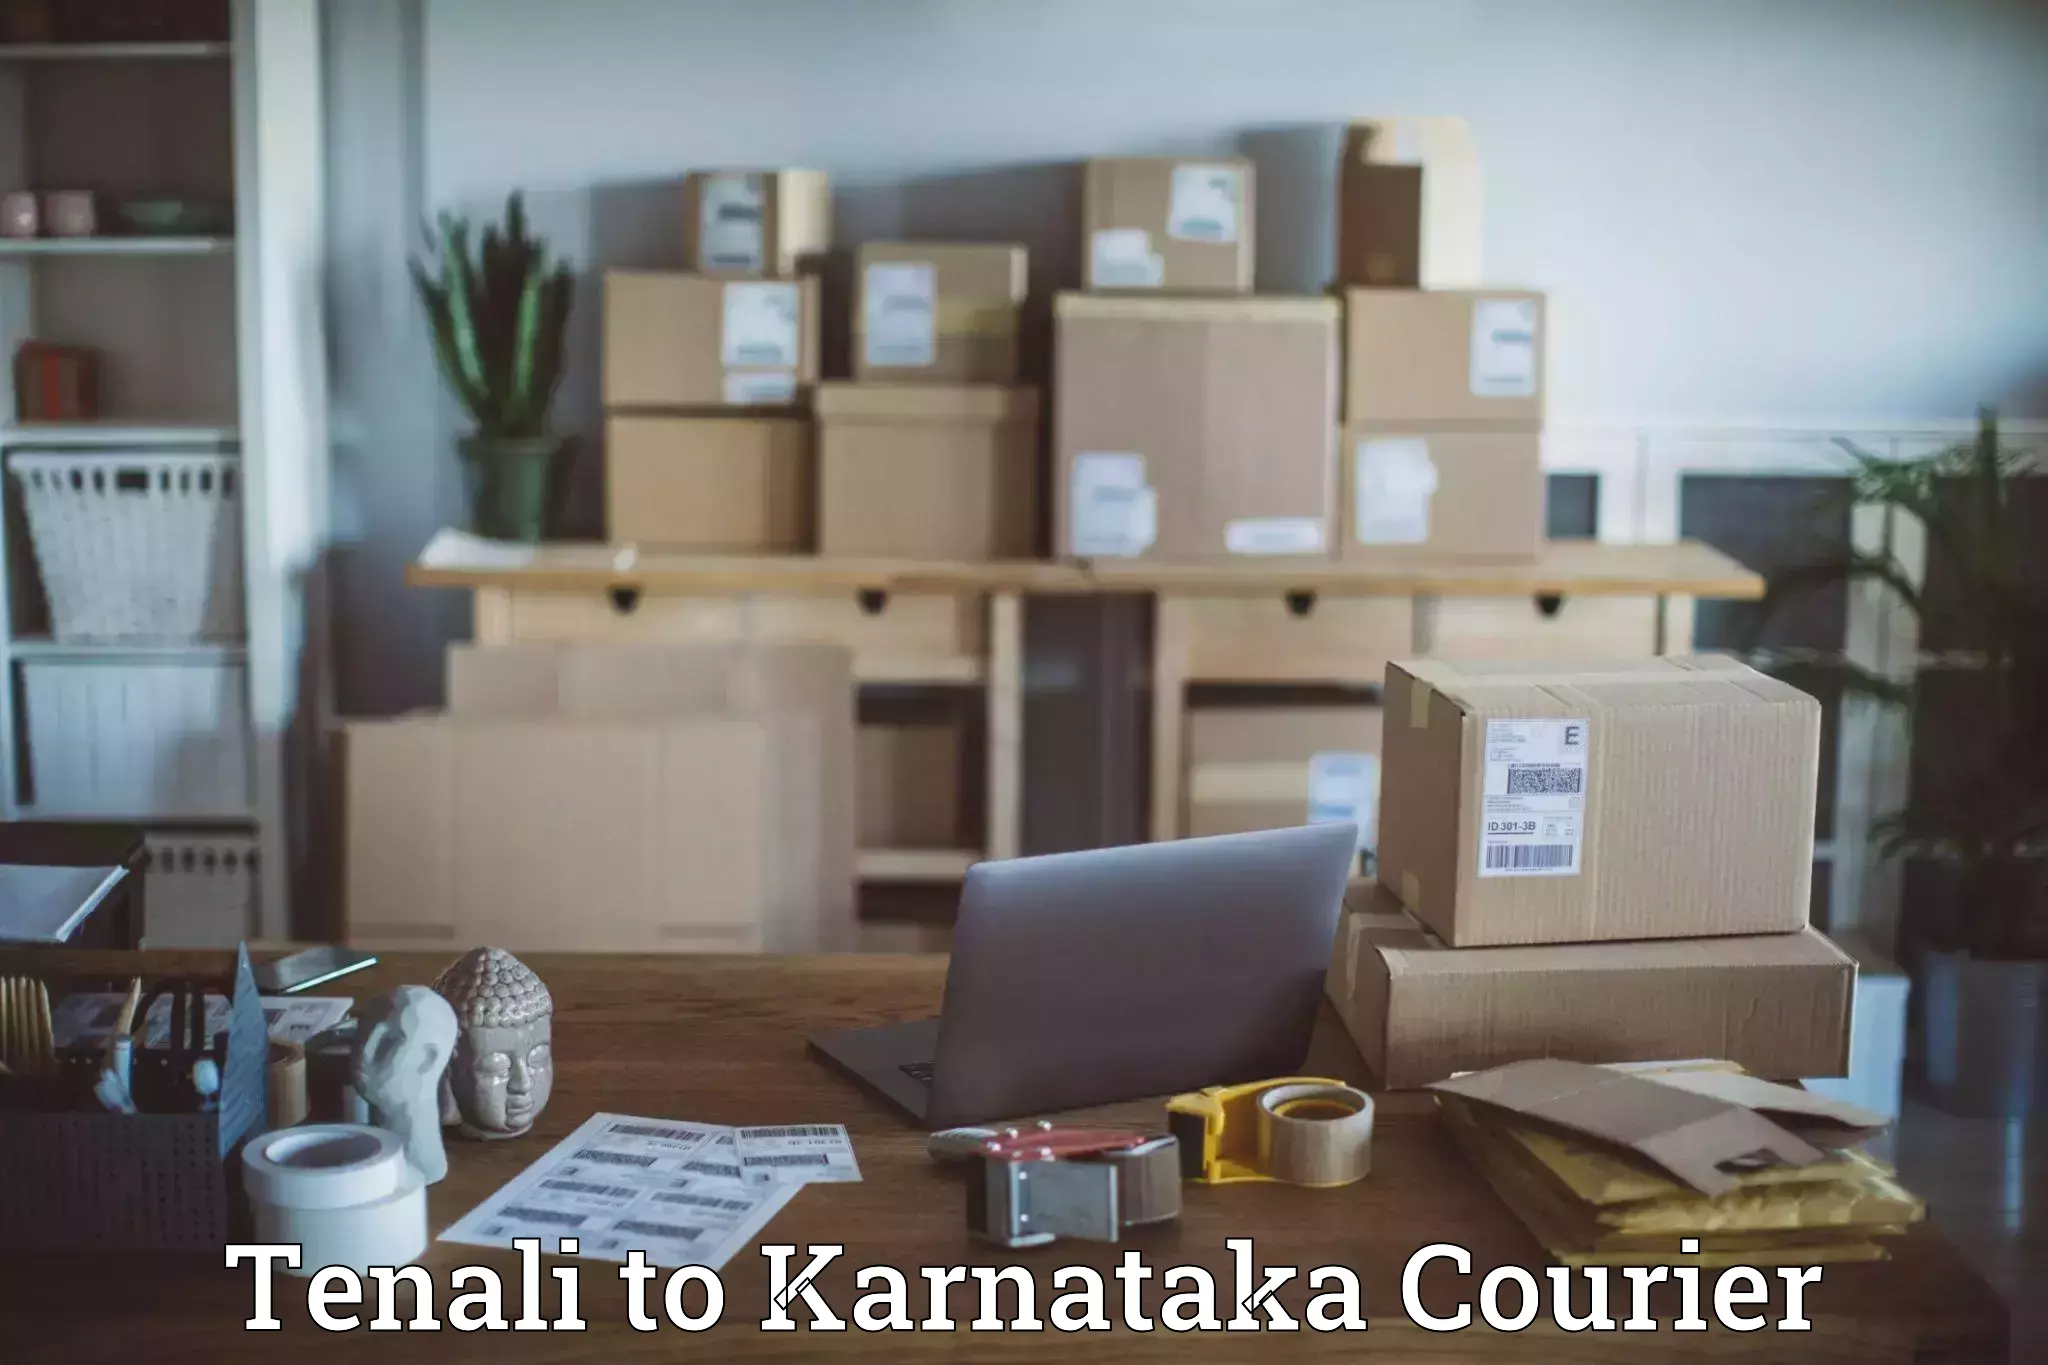 24-hour courier services Tenali to Hagaribommanahalli